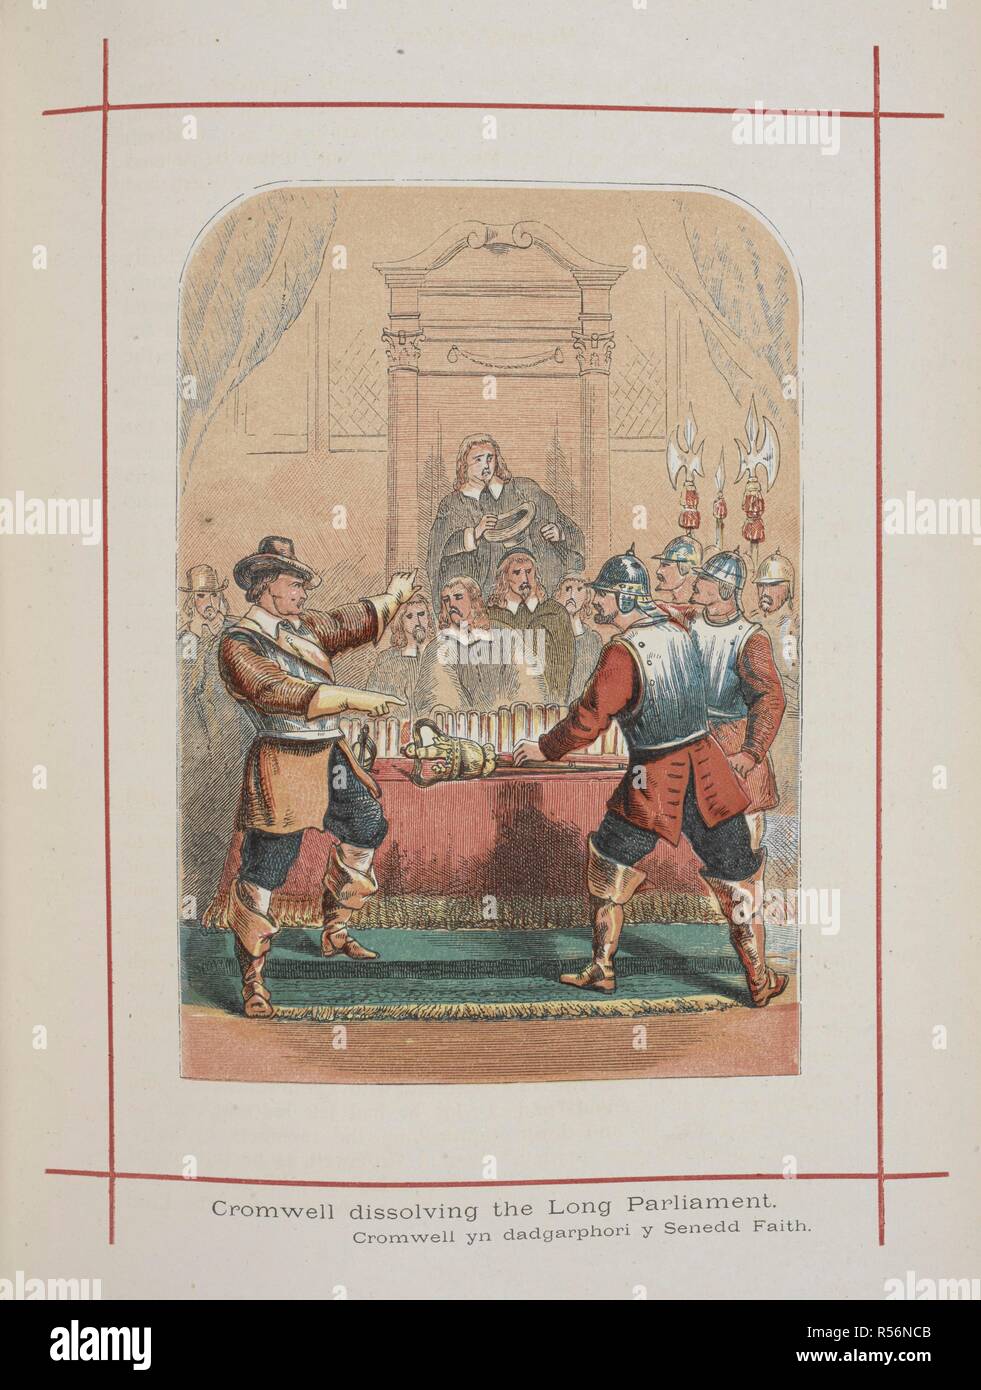 Cromwell dissolving the Long Parliament. Soldiers taking the speaker's mace away. A History of England for the Young. London ; New York : London Printing & Publishing Co., [1872, 73]. Source: 9504.ff.7 vol.II page 96. Author: Tyrrell, Henry. Stock Photo